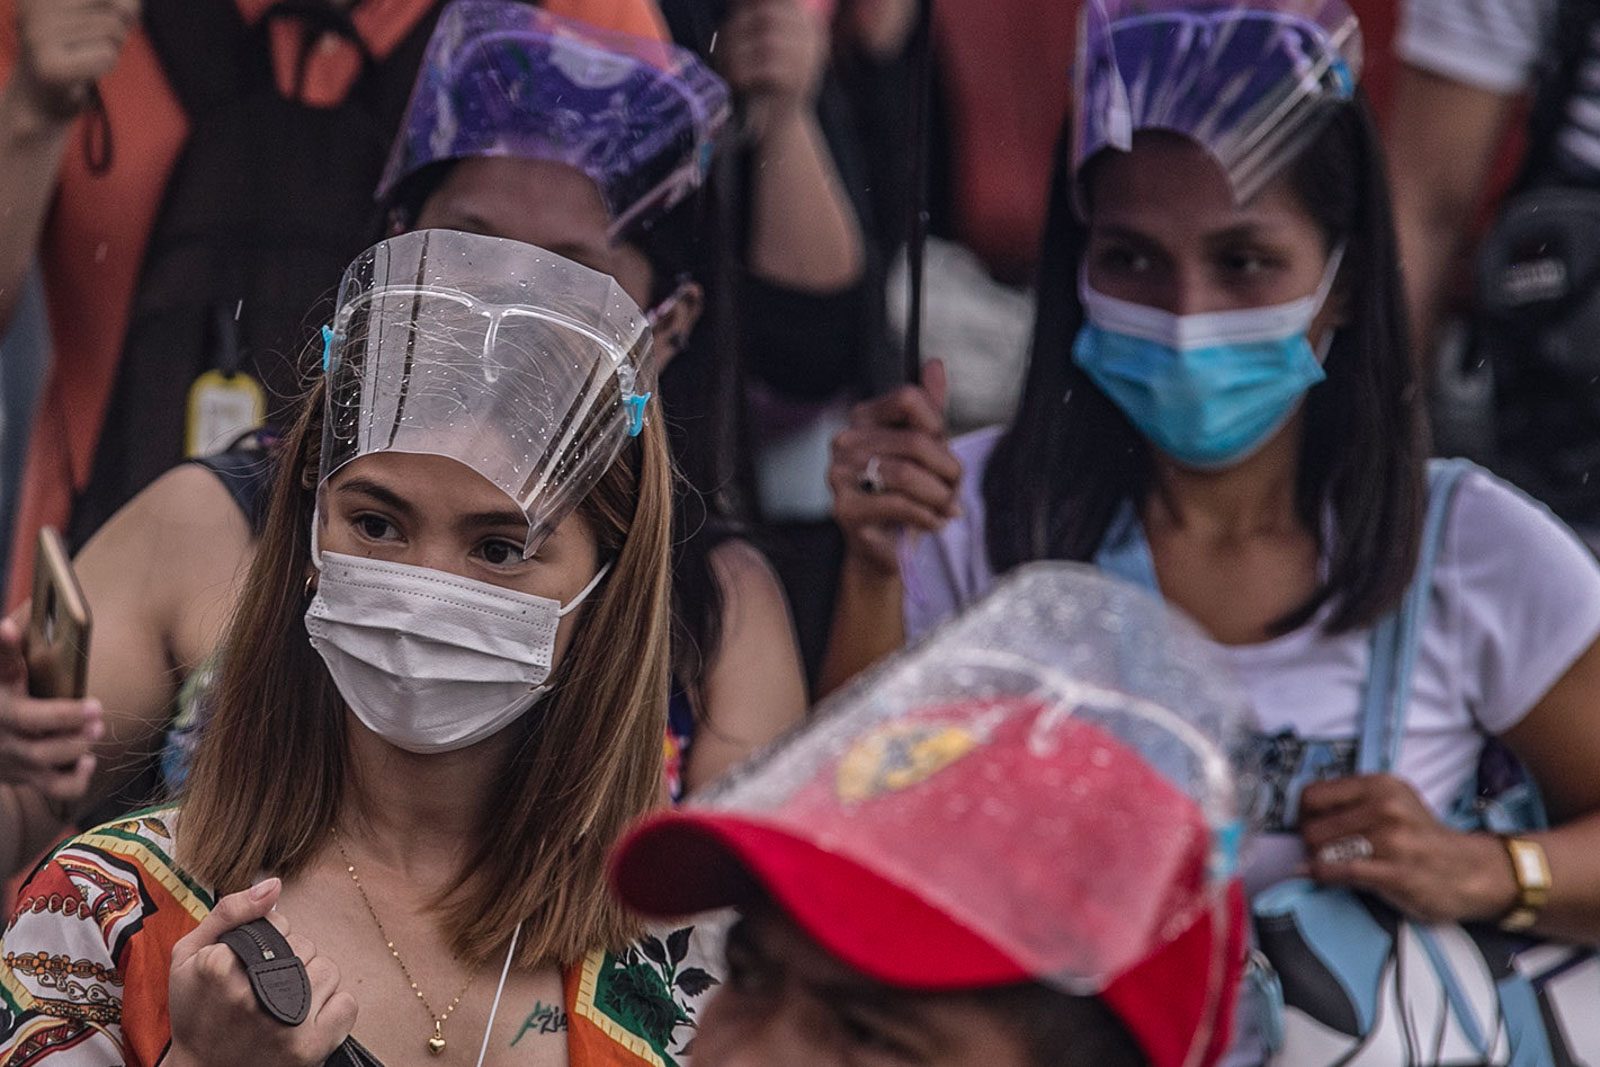 PH scores lowest among ASEAN countries in gov’t pandemic response – survey